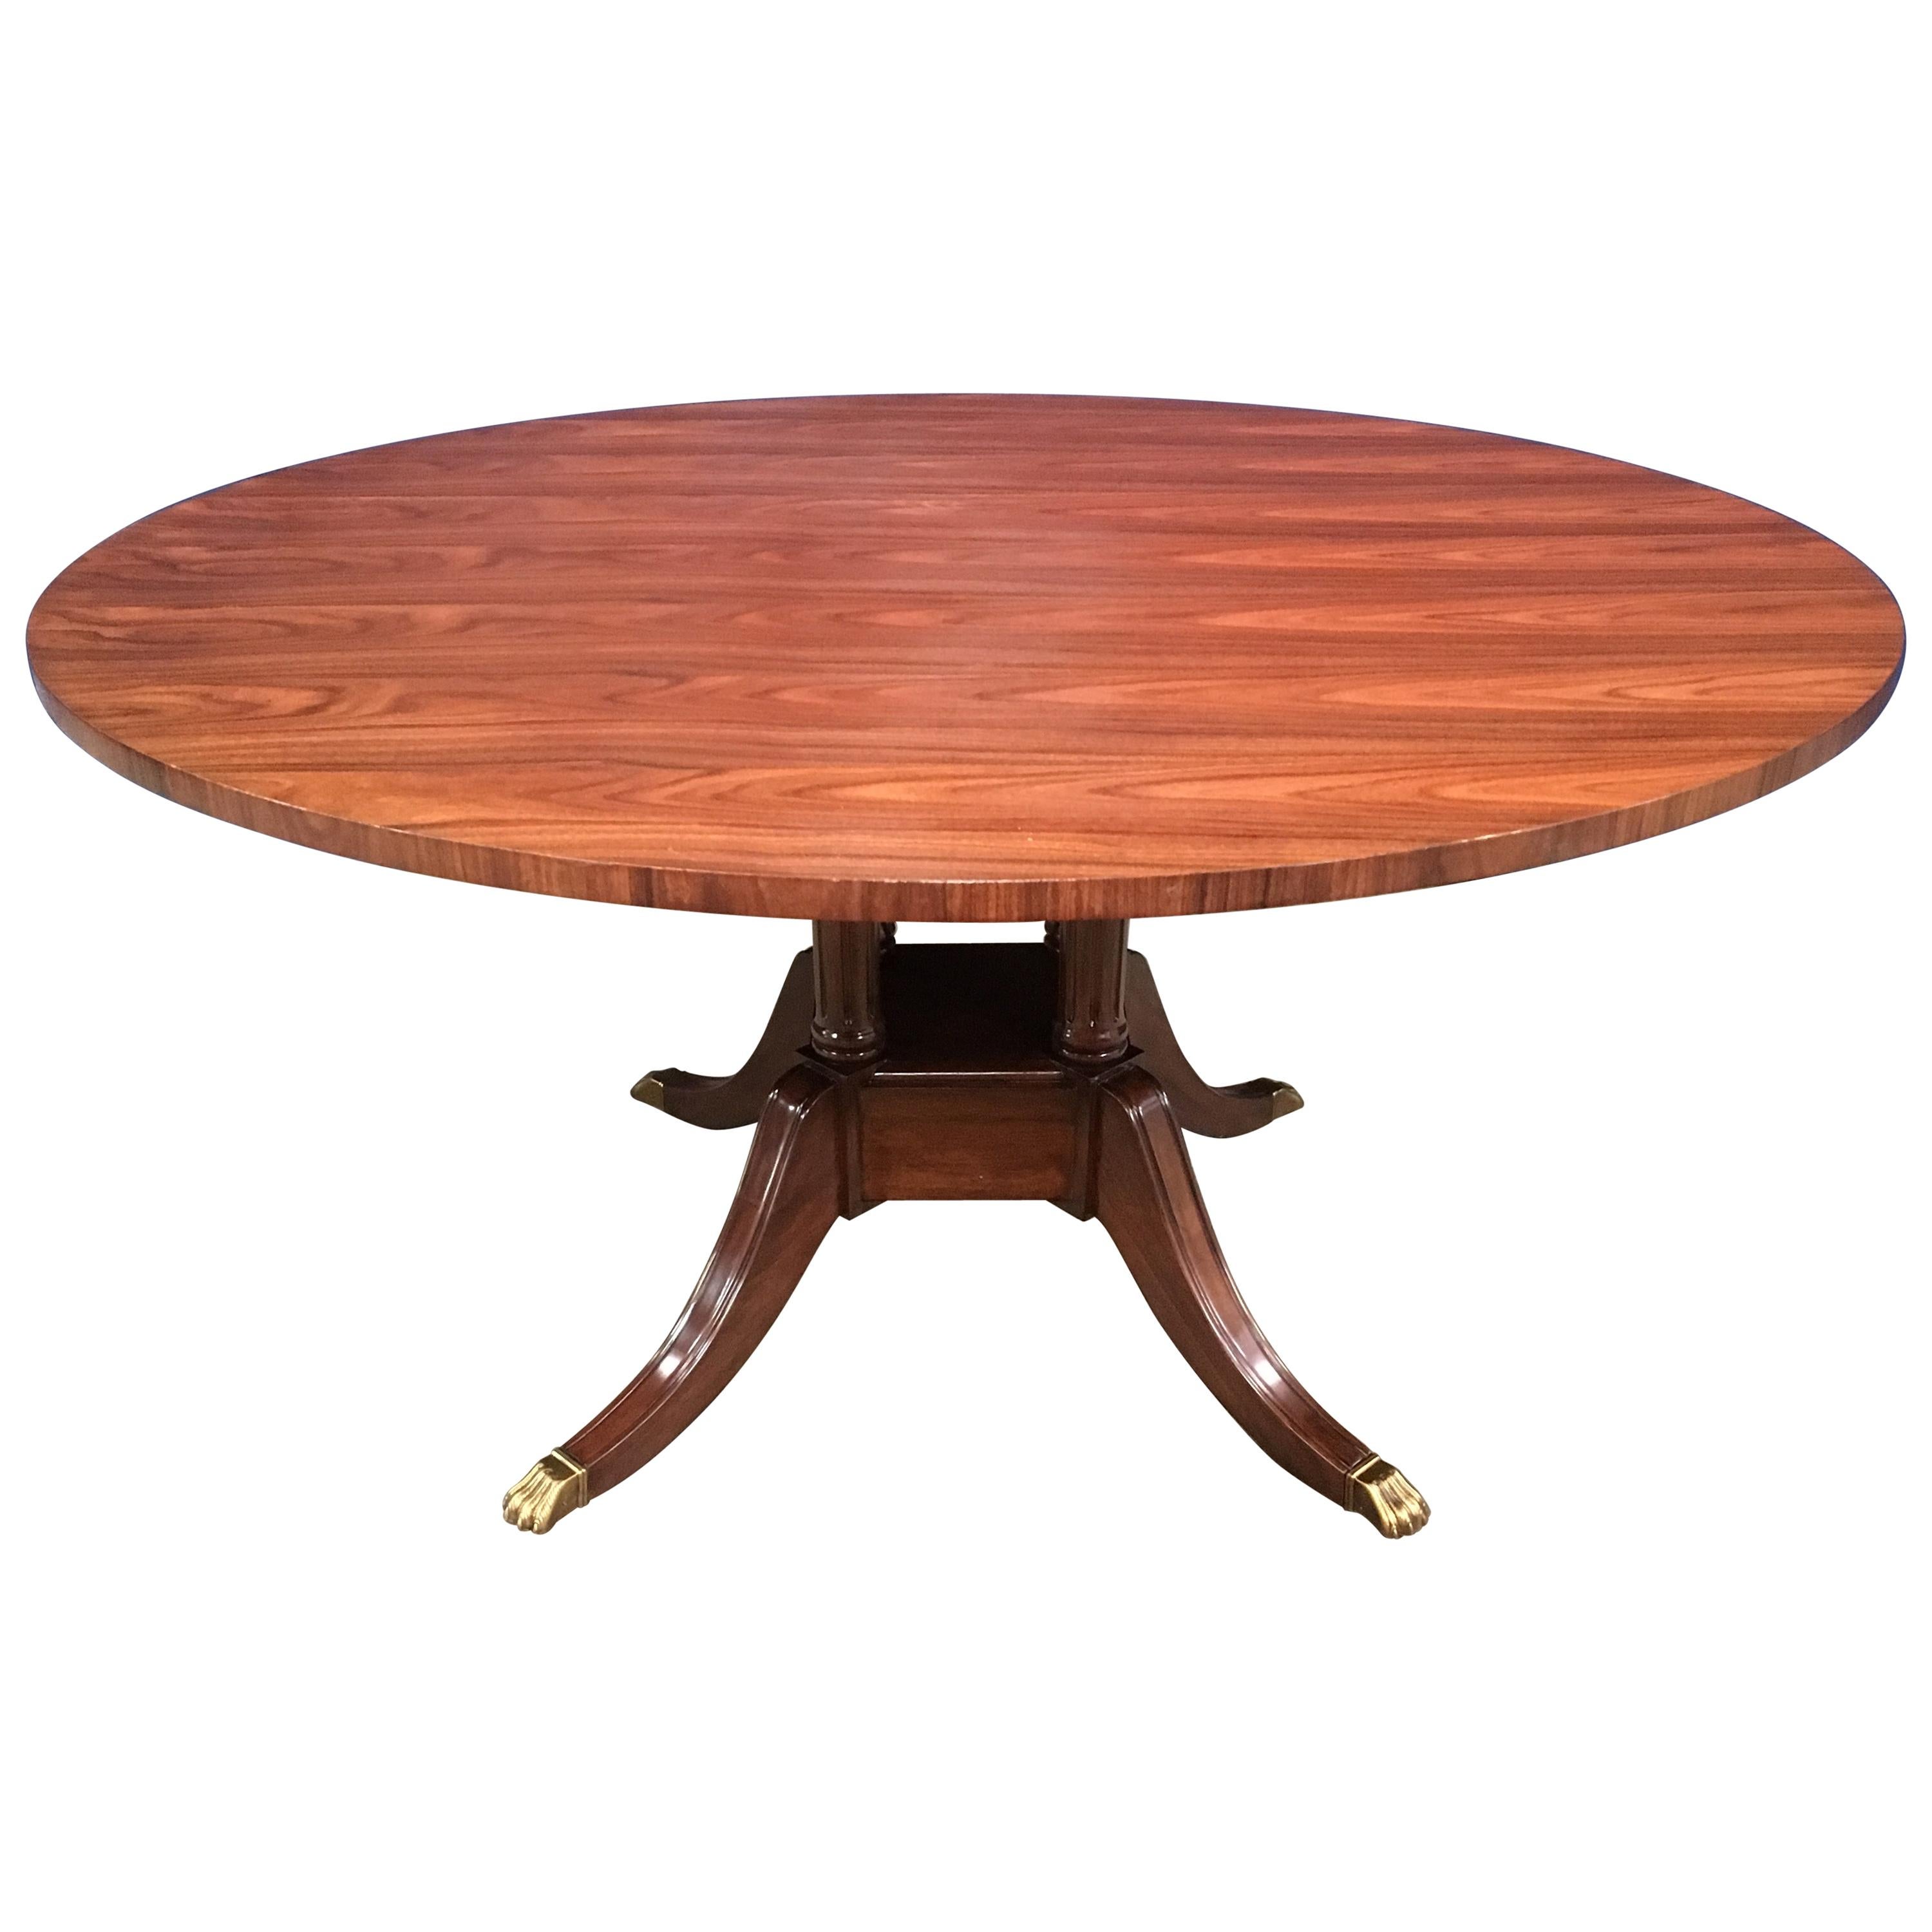 Round Rosewood Georgian Style Pedestal Dining Table by Leighton Hall